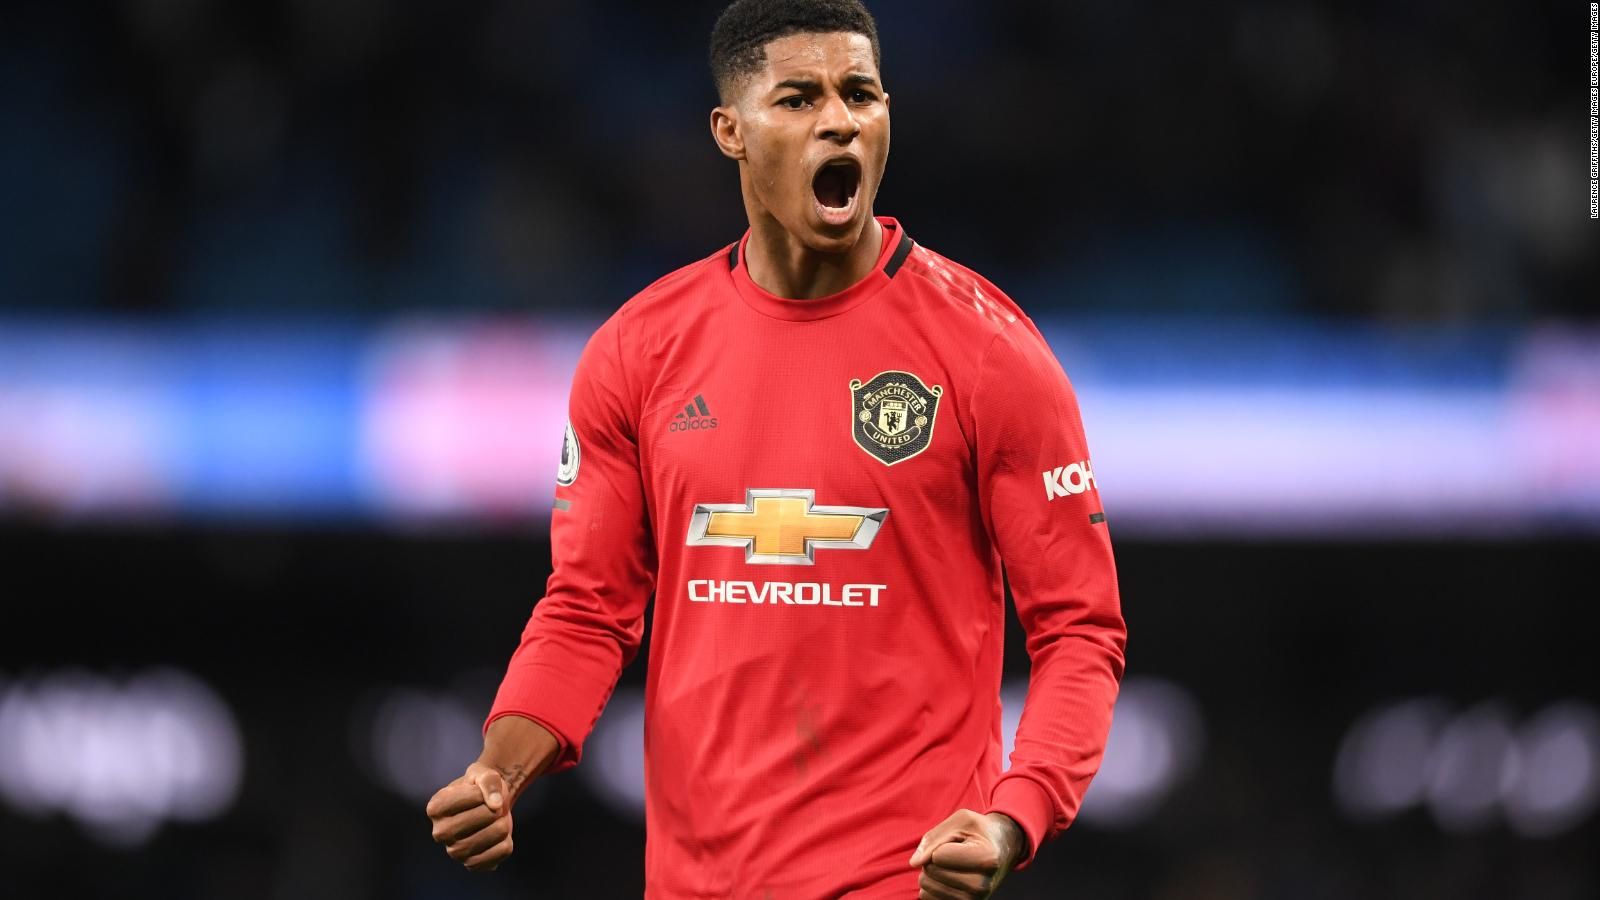 Marcus Rashford, The 22 Year Old Who Caused The Government To Change Policy